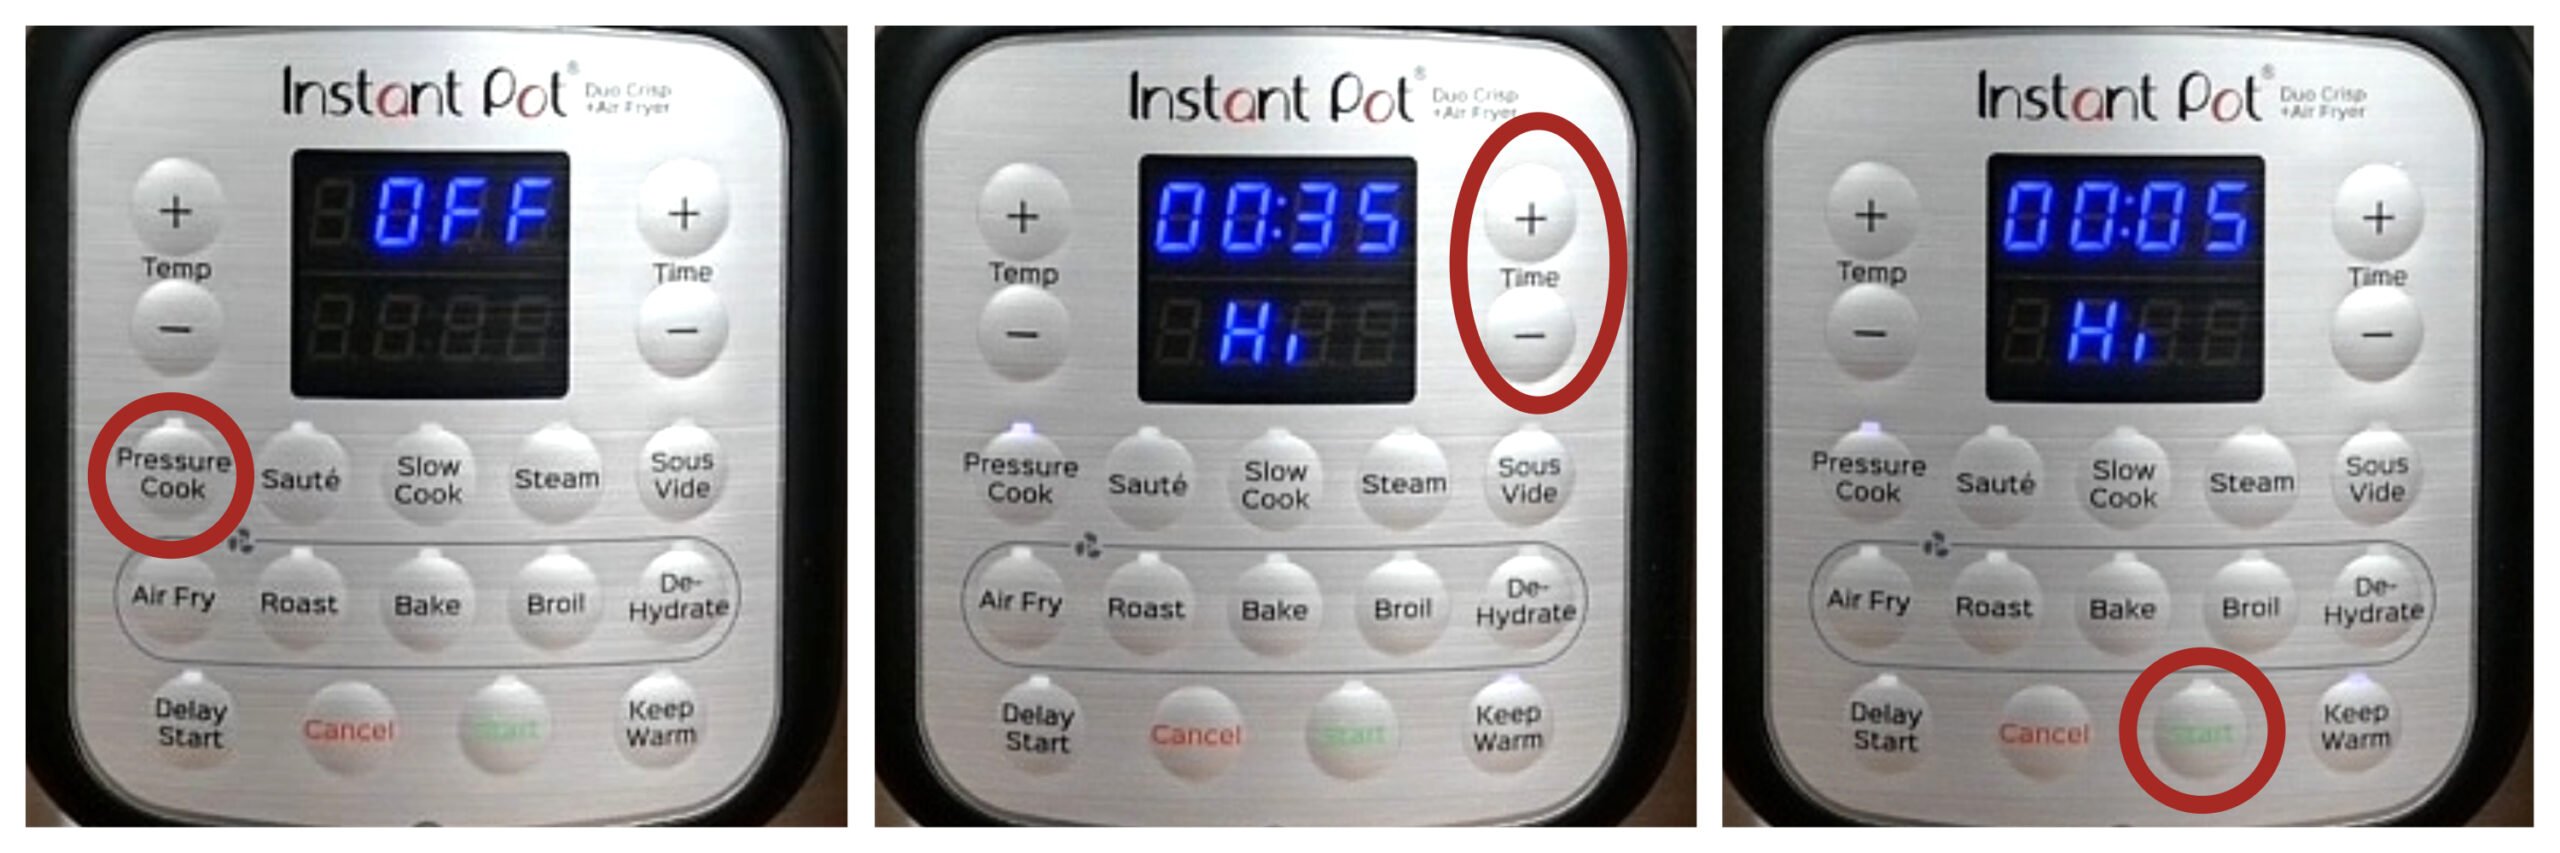 Instant Pot Duo Crisp Water Test collage - pressure cook button, + and -, display says 0005, press start